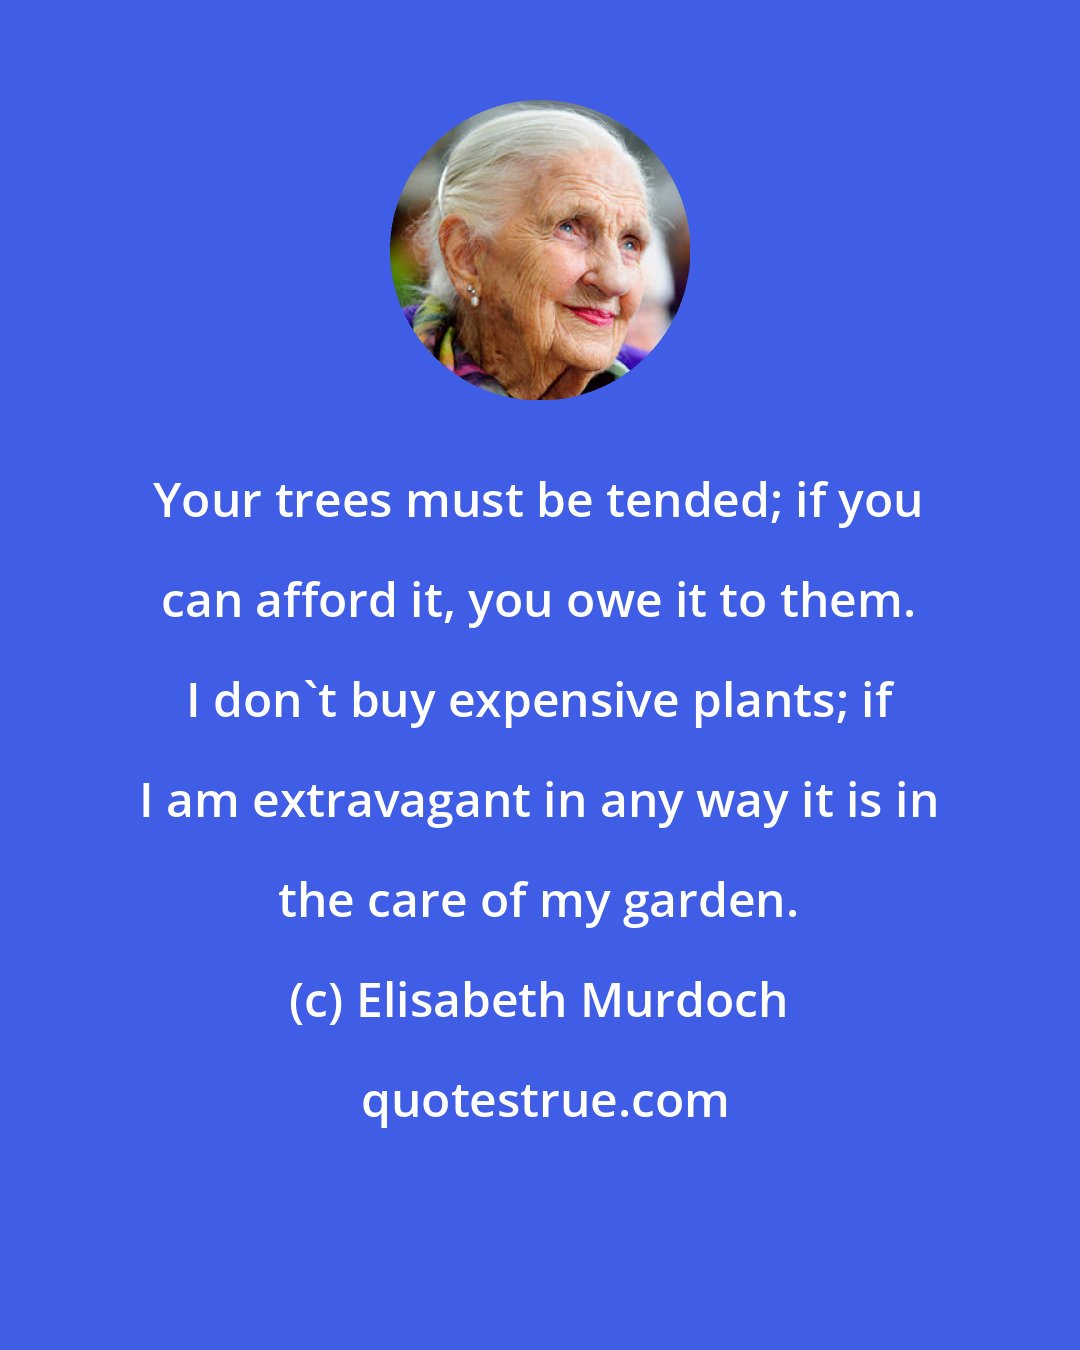 Elisabeth Murdoch: Your trees must be tended; if you can afford it, you owe it to them. I don't buy expensive plants; if I am extravagant in any way it is in the care of my garden.